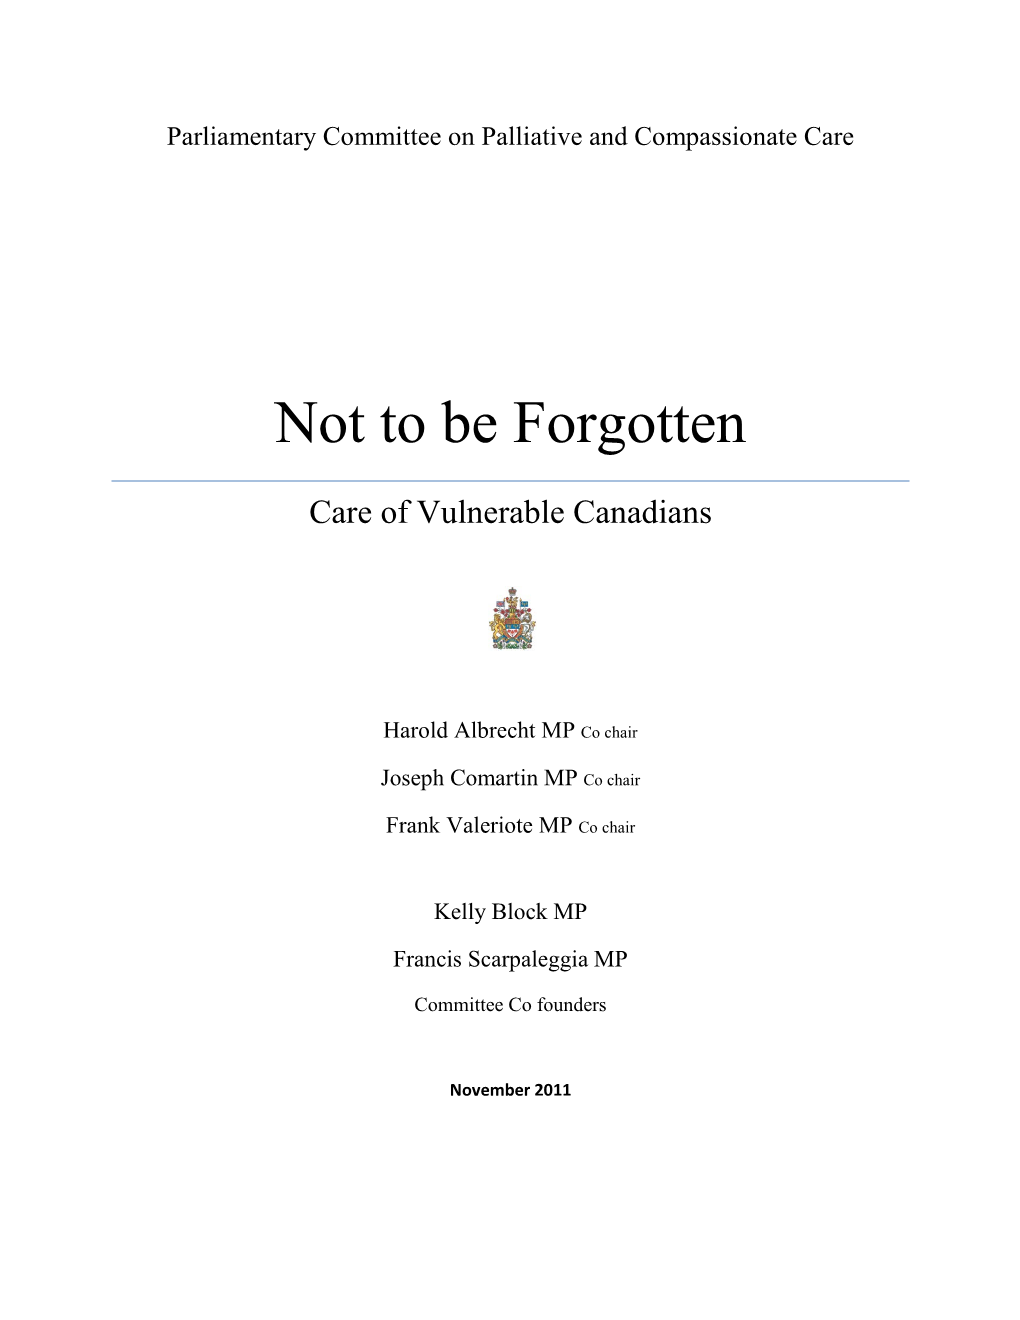 Not to Be Forgotten: Care of Vulnerable Canadians